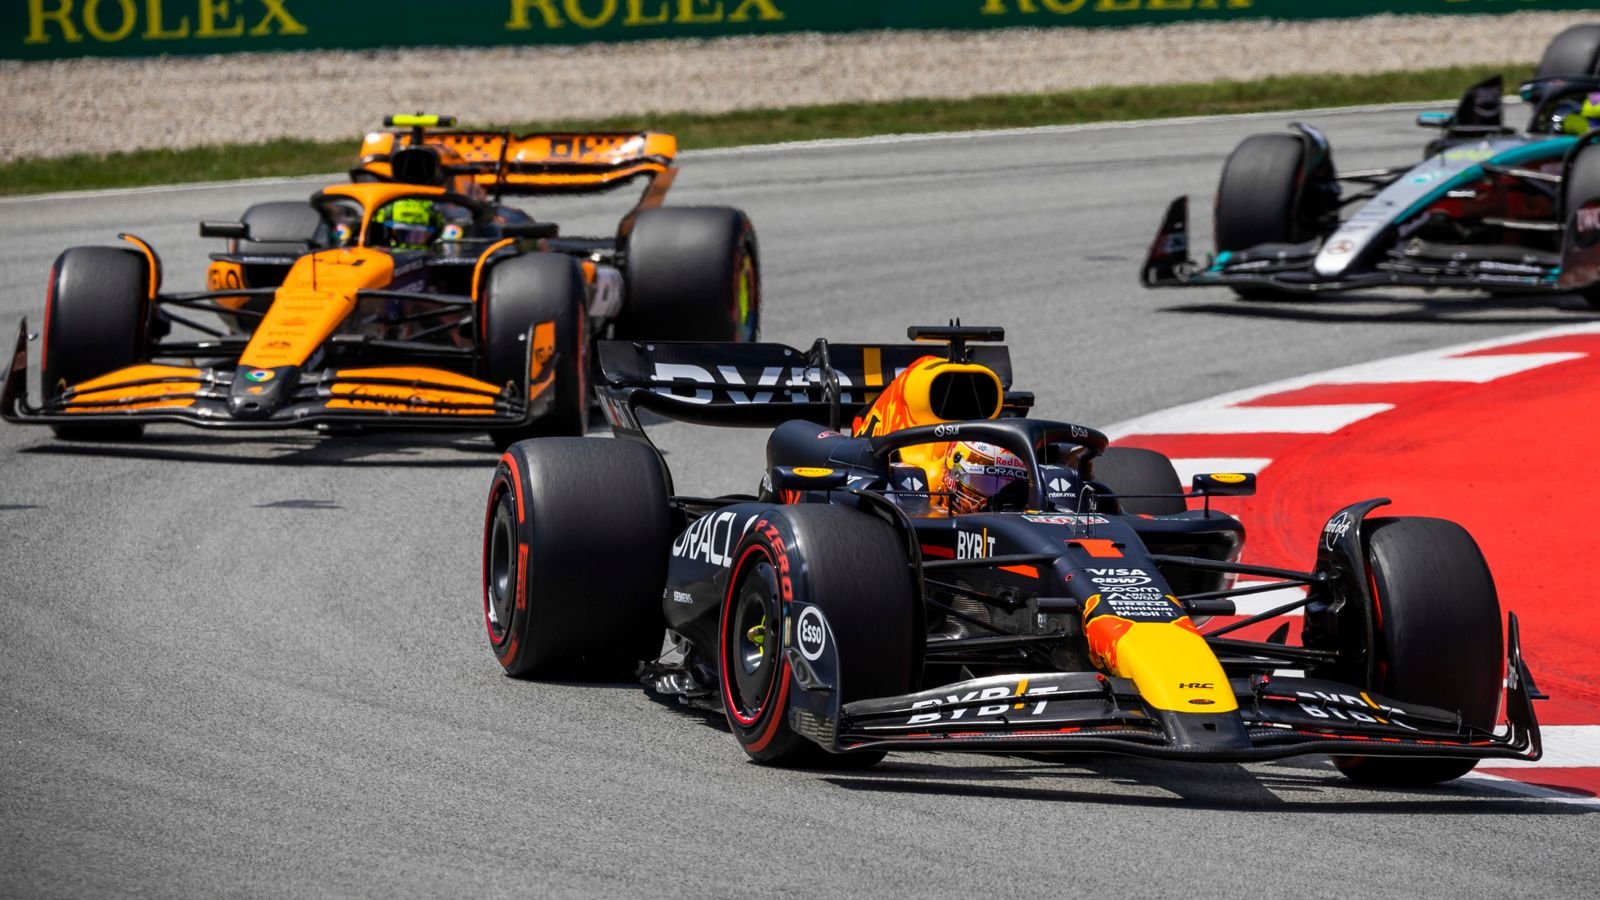 Austrian GP: Red Bull and McLaren expecting tight fight at Red Bull Ring on Sprint weekend | F1 News